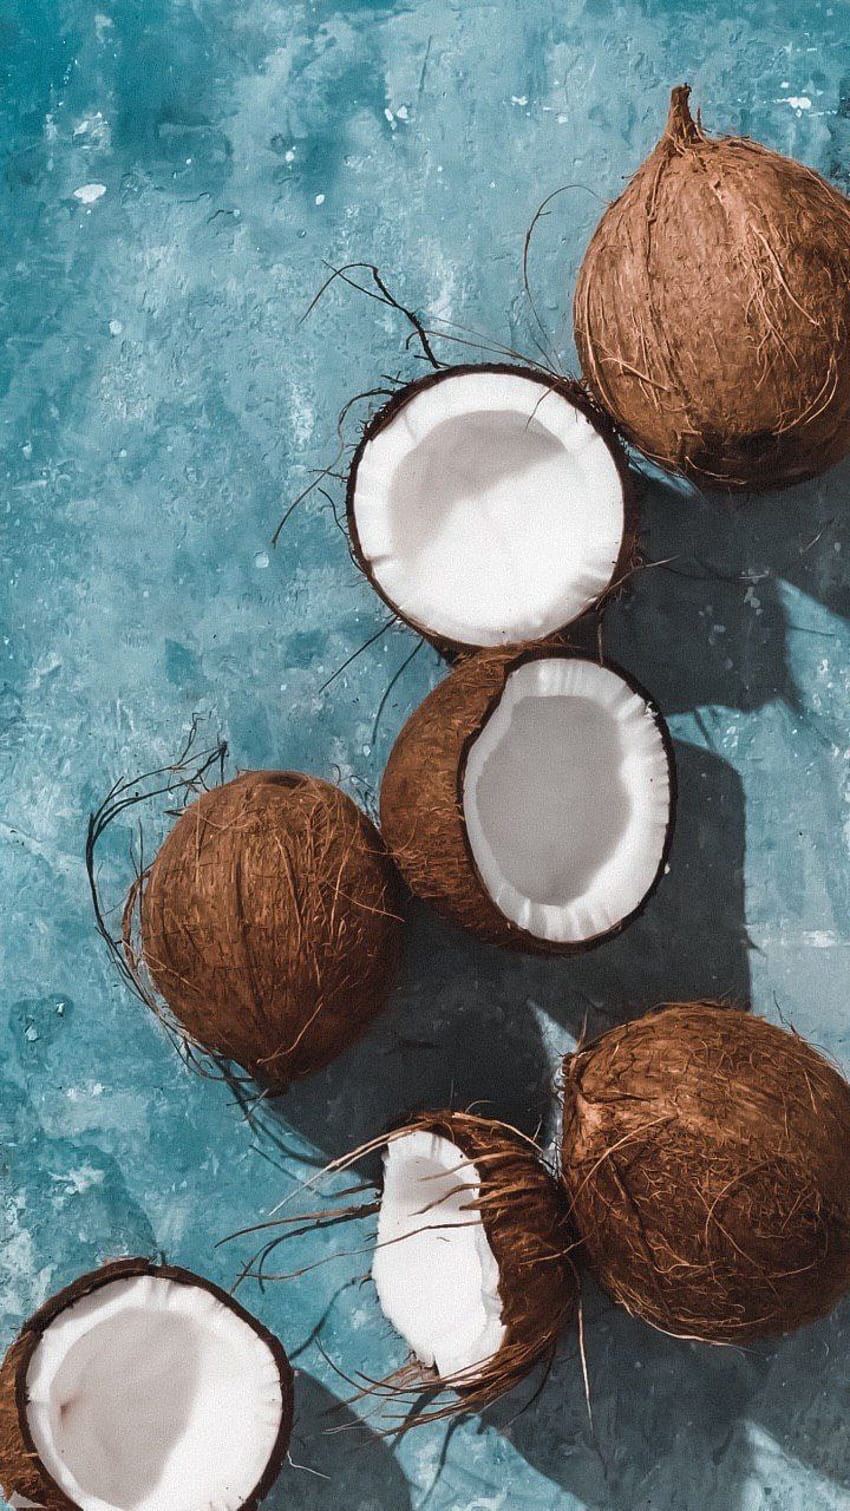 Download Coconut wallpapers for mobile phone free Coconut HD pictures